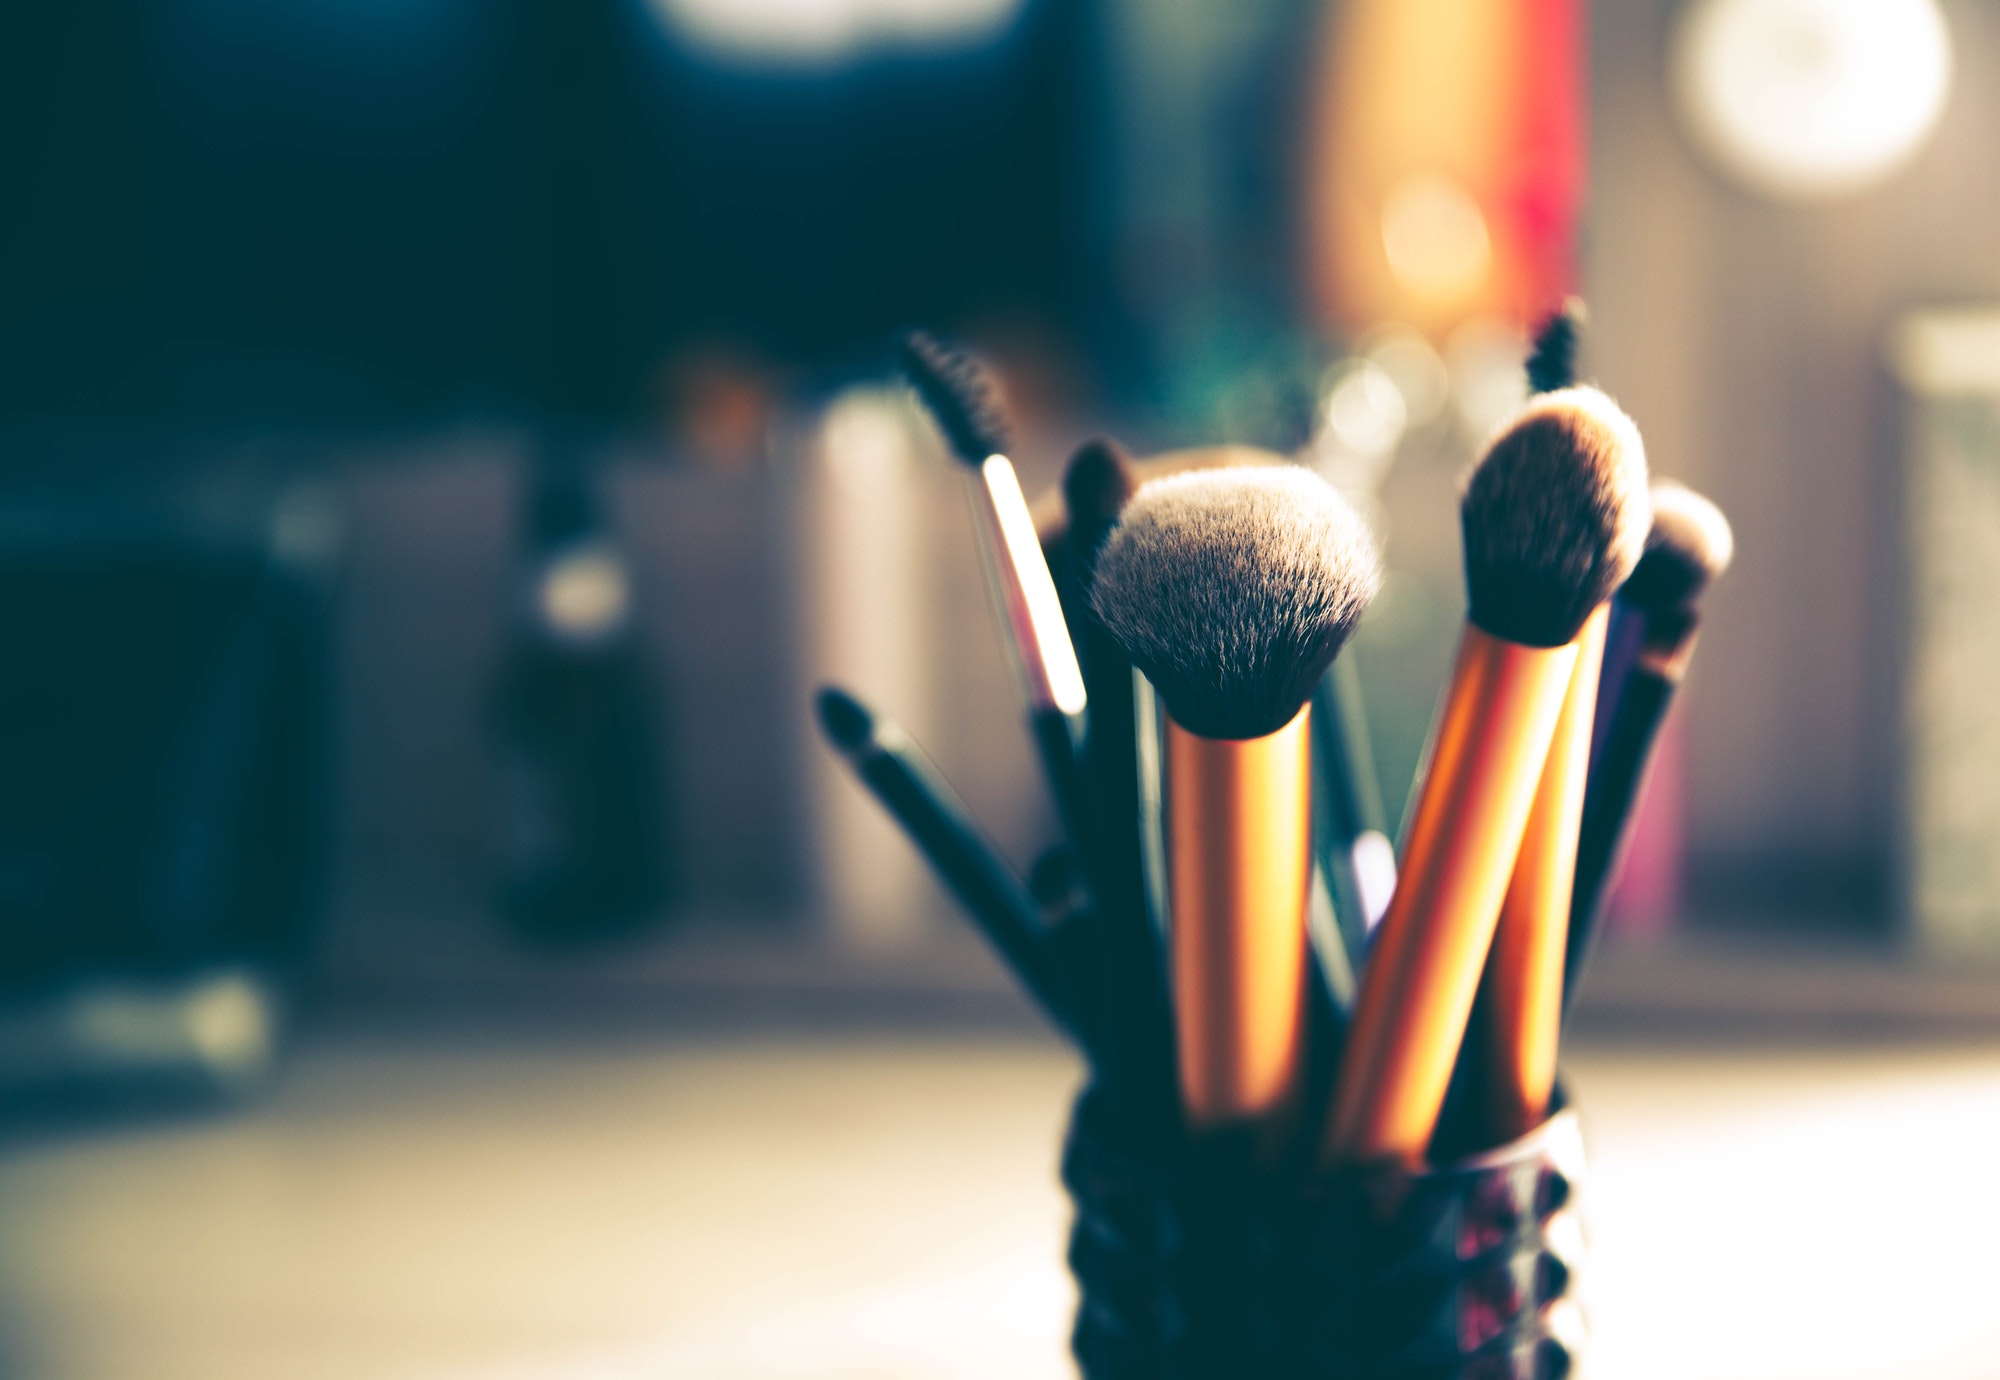 Brushes for make-up on the table